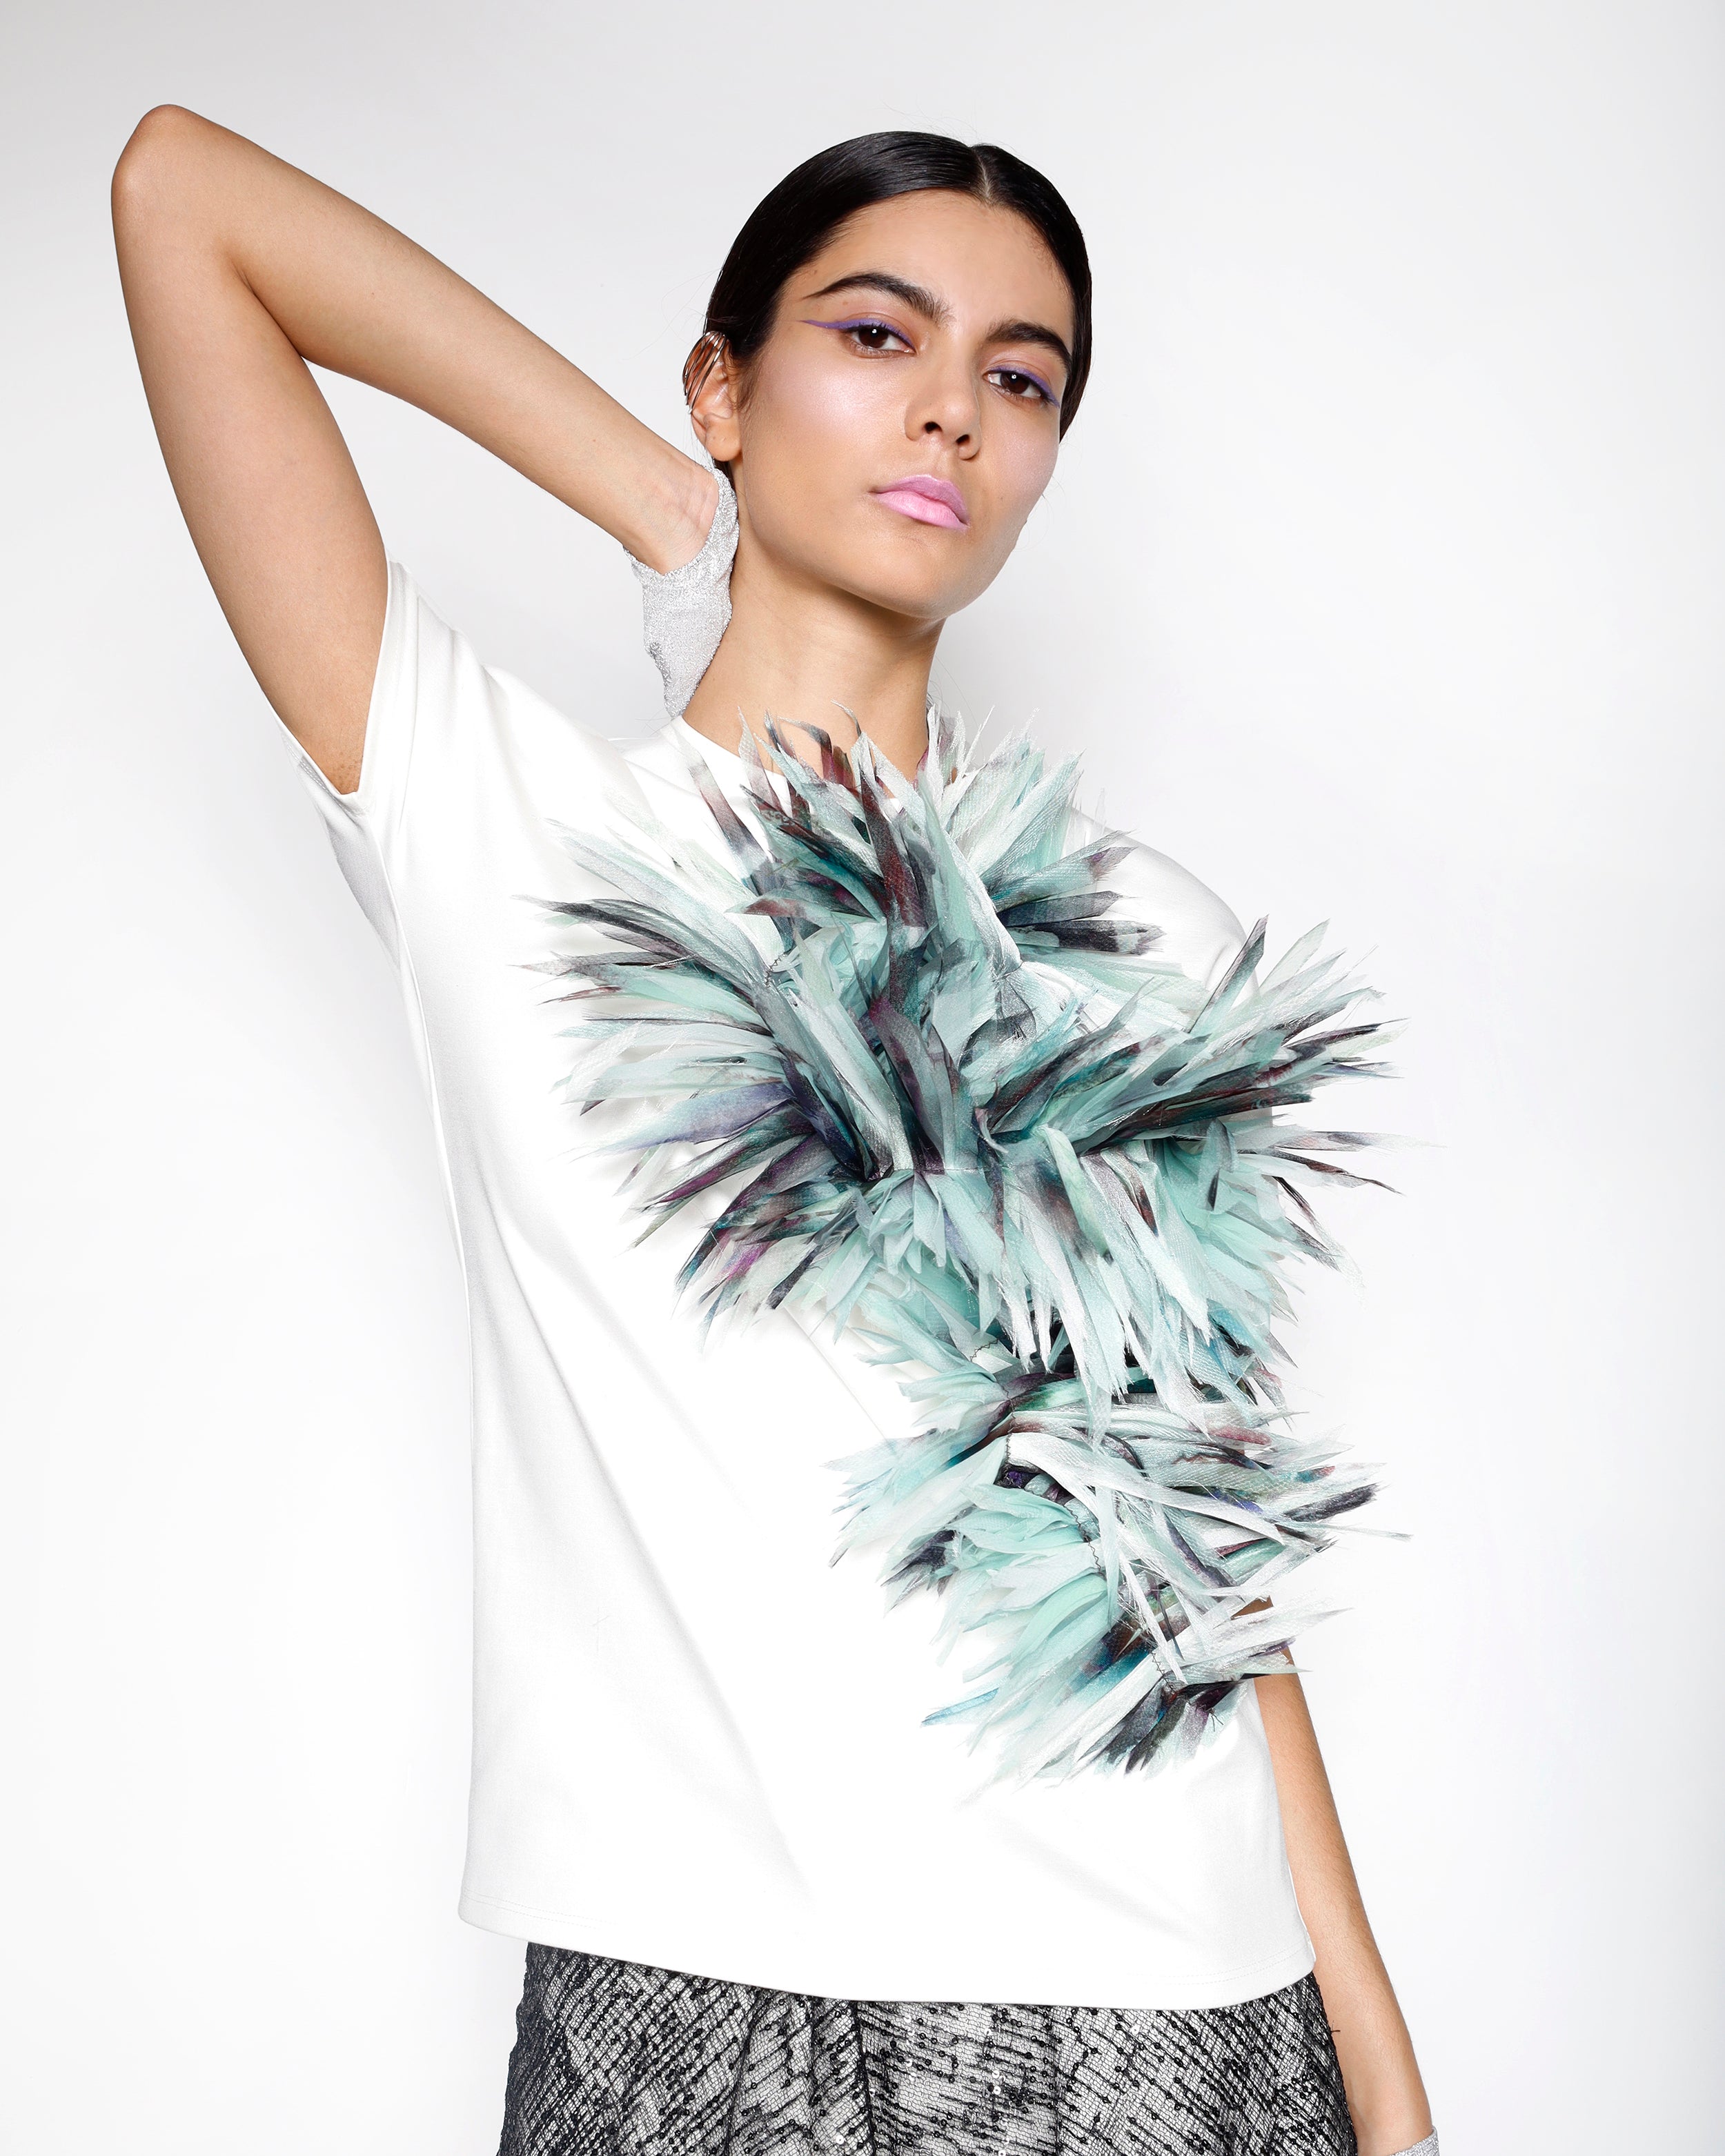 Maison Marie Saint Pierre | Top | Christiano | White | Green Faded Print